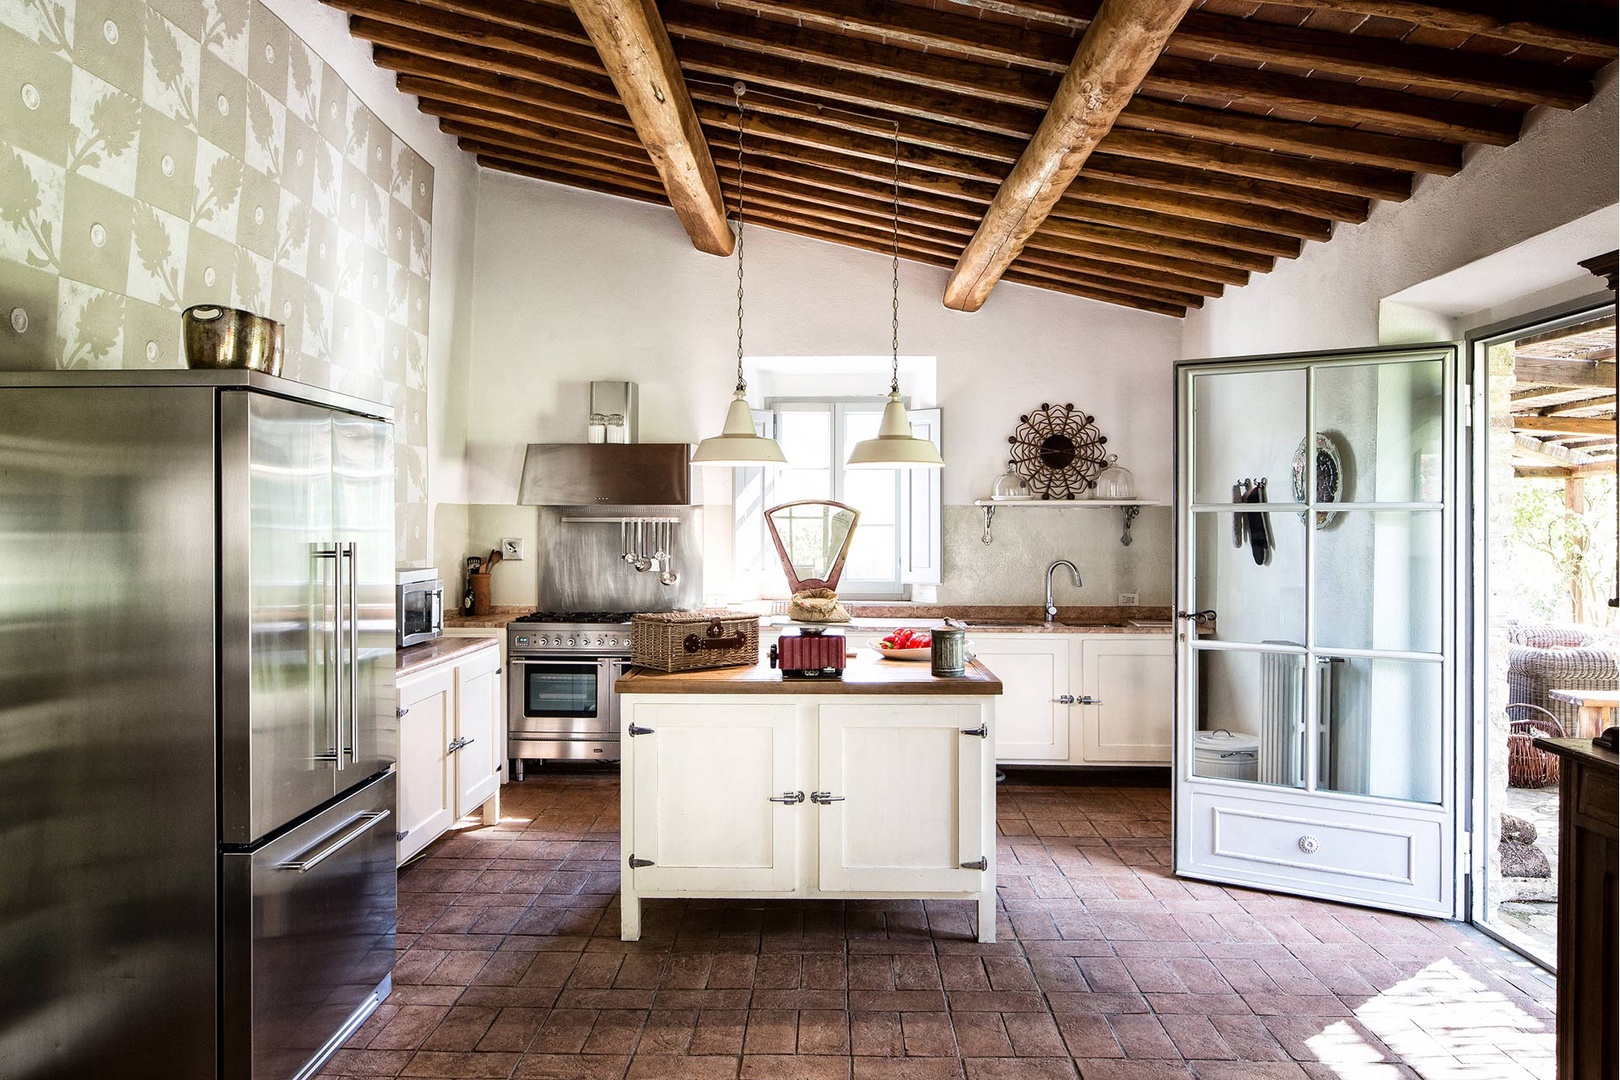 Farm-style kitchen is fully equipped..